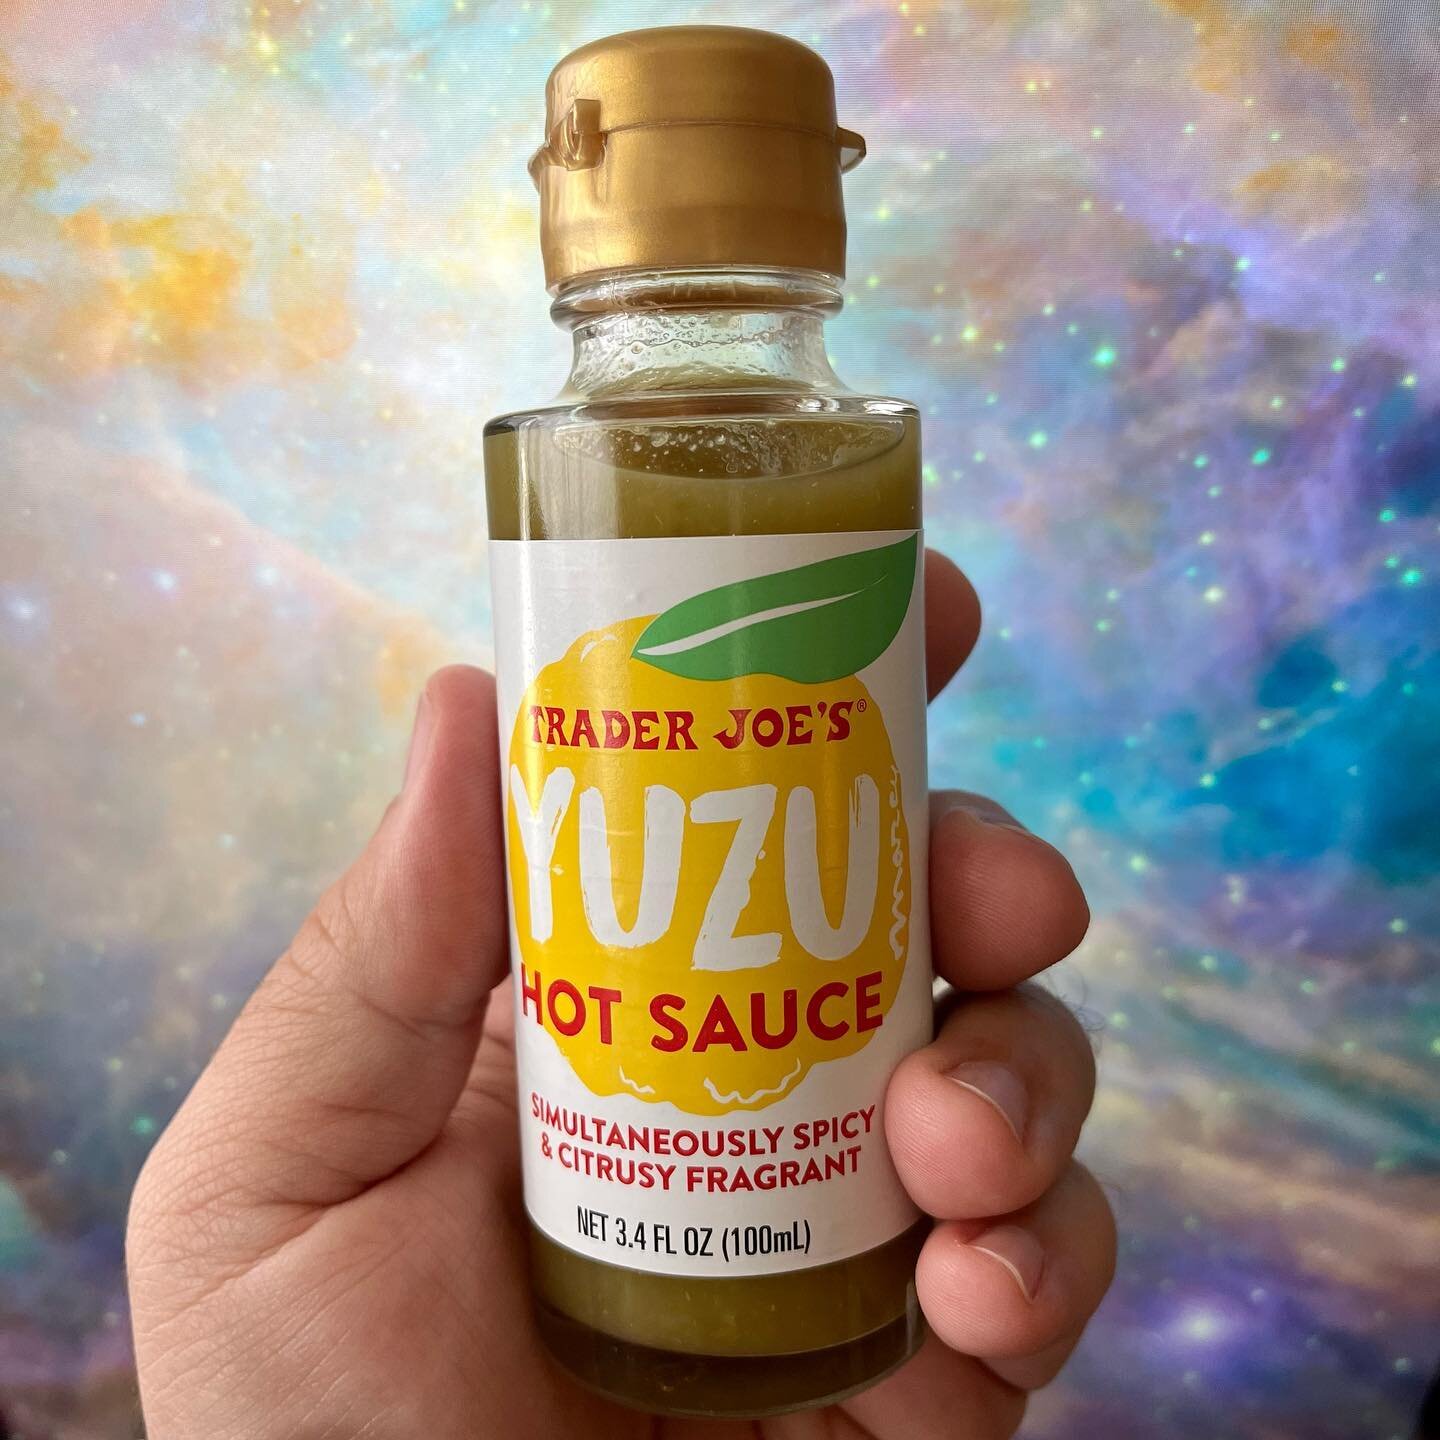 This sauce is a real galactic oddity. It&rsquo;s sweet, it&rsquo;s sour, it&rsquo;s salty, and its spicy. Spicier than I anticipated at least!

I don&rsquo;t make it to Trader Joe&rsquo;s often but I recently discovered their gluten free bagels, whic